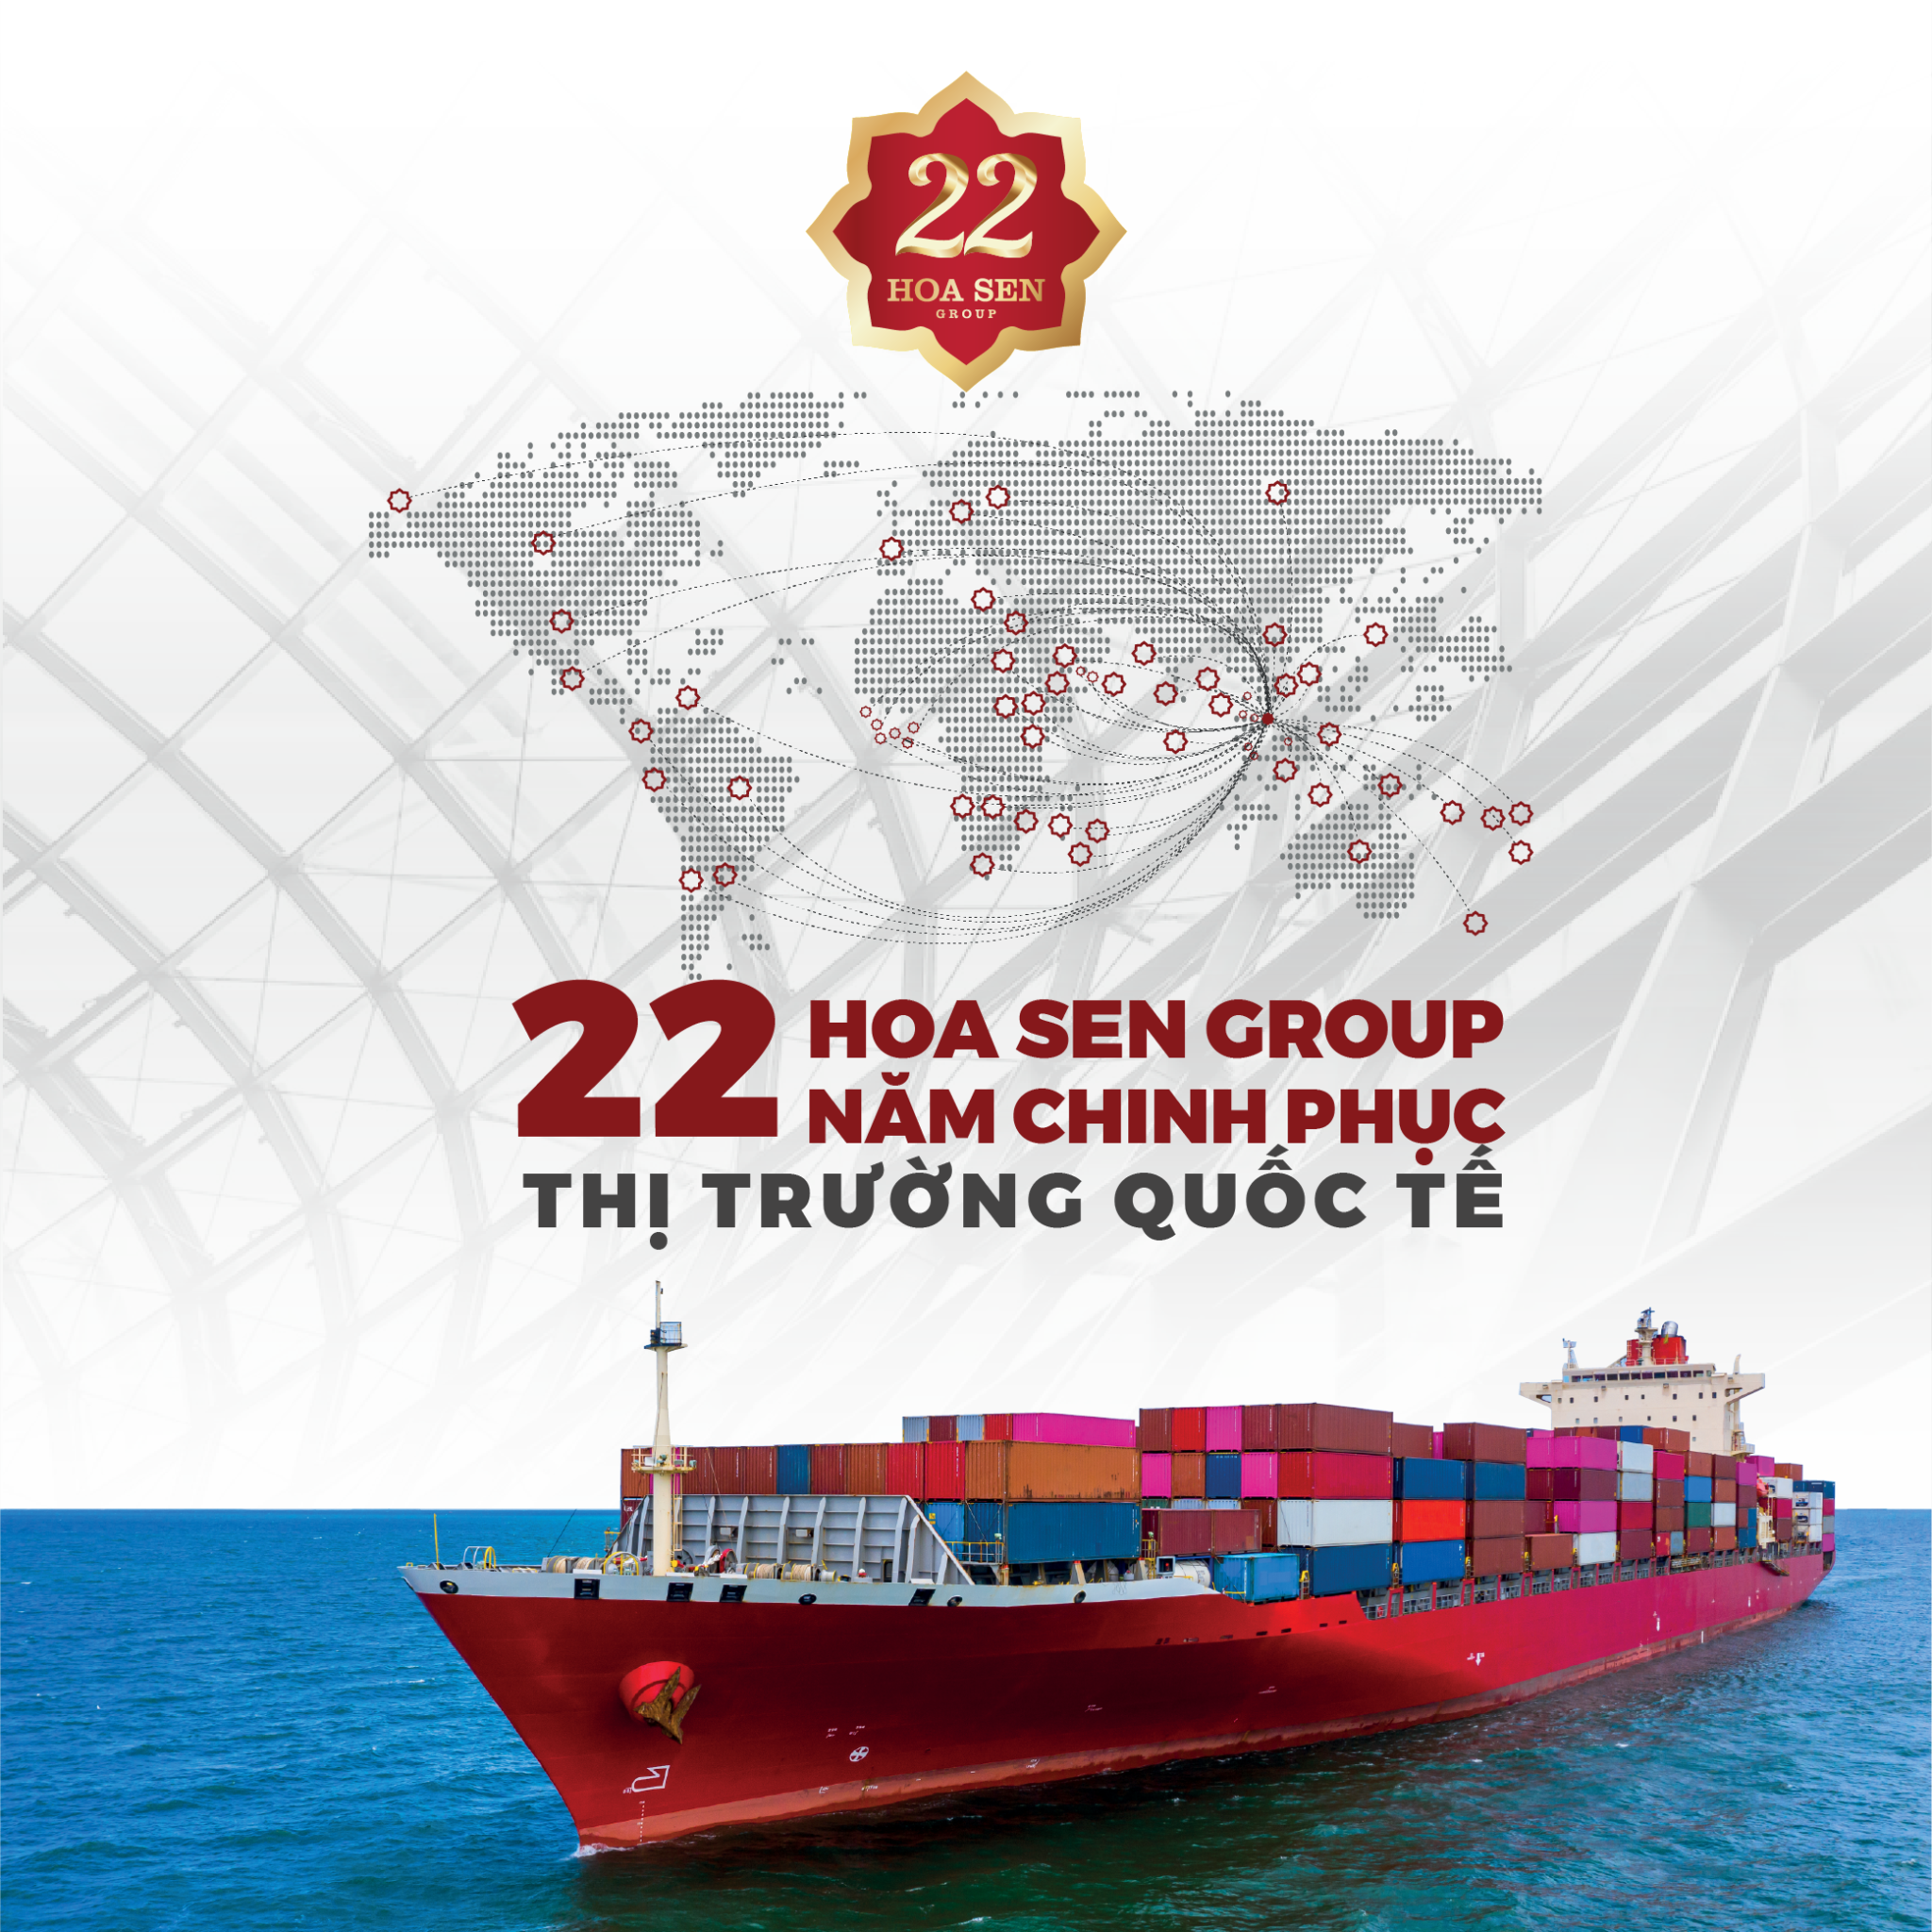 Hoa Sen Group's products are present in more than 87 countries and territories so far